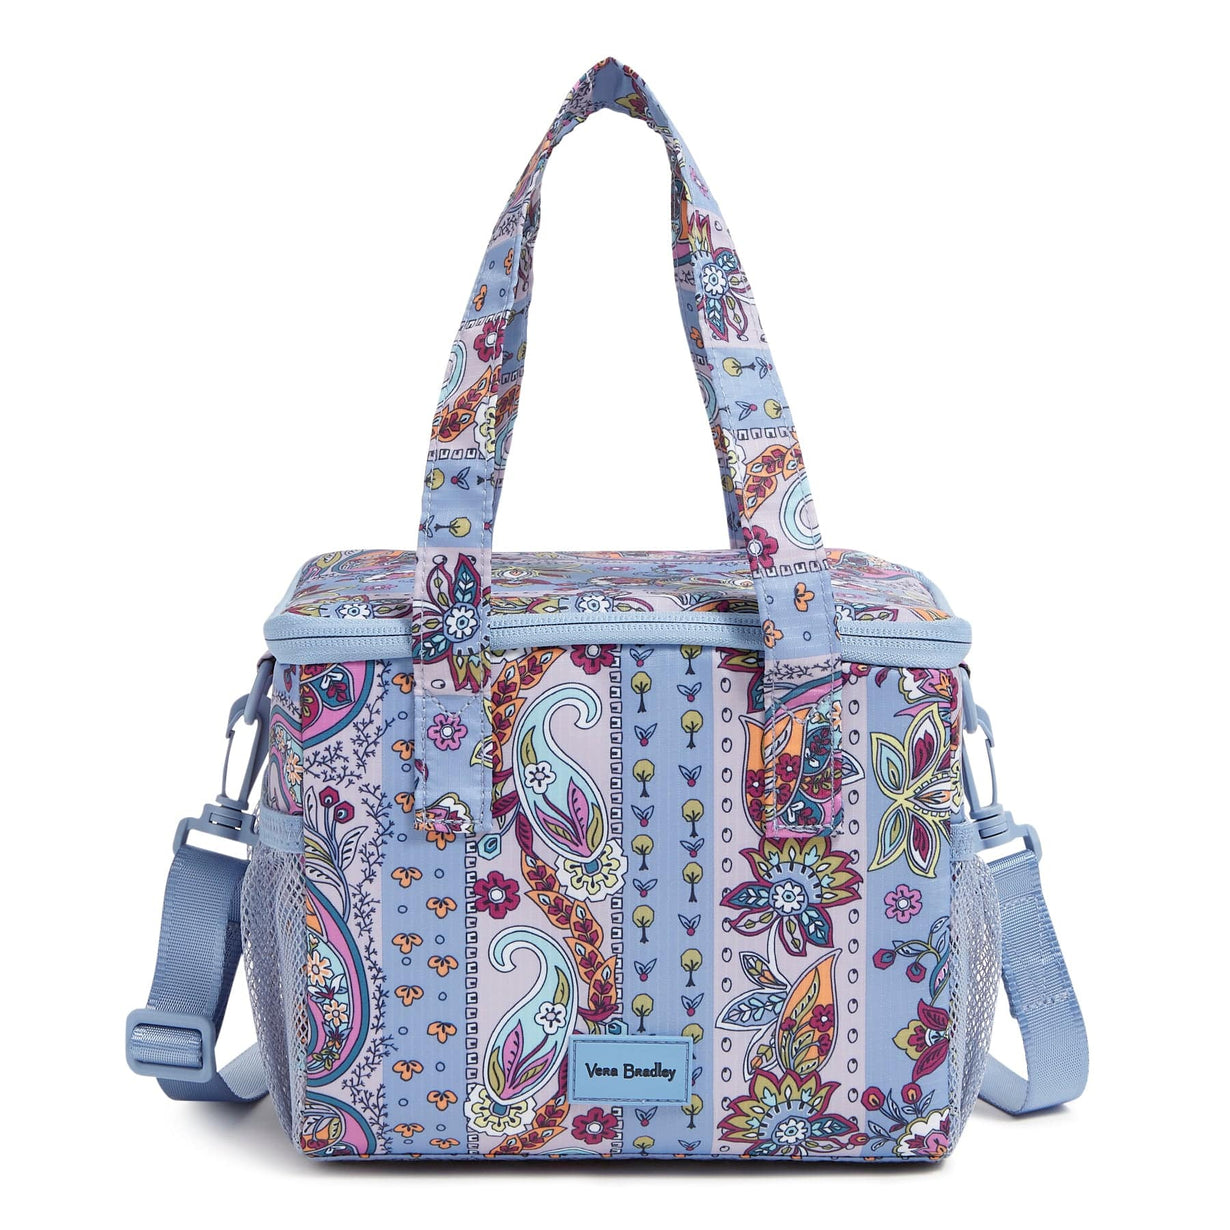 Lunch cooler in blue paisley pattern